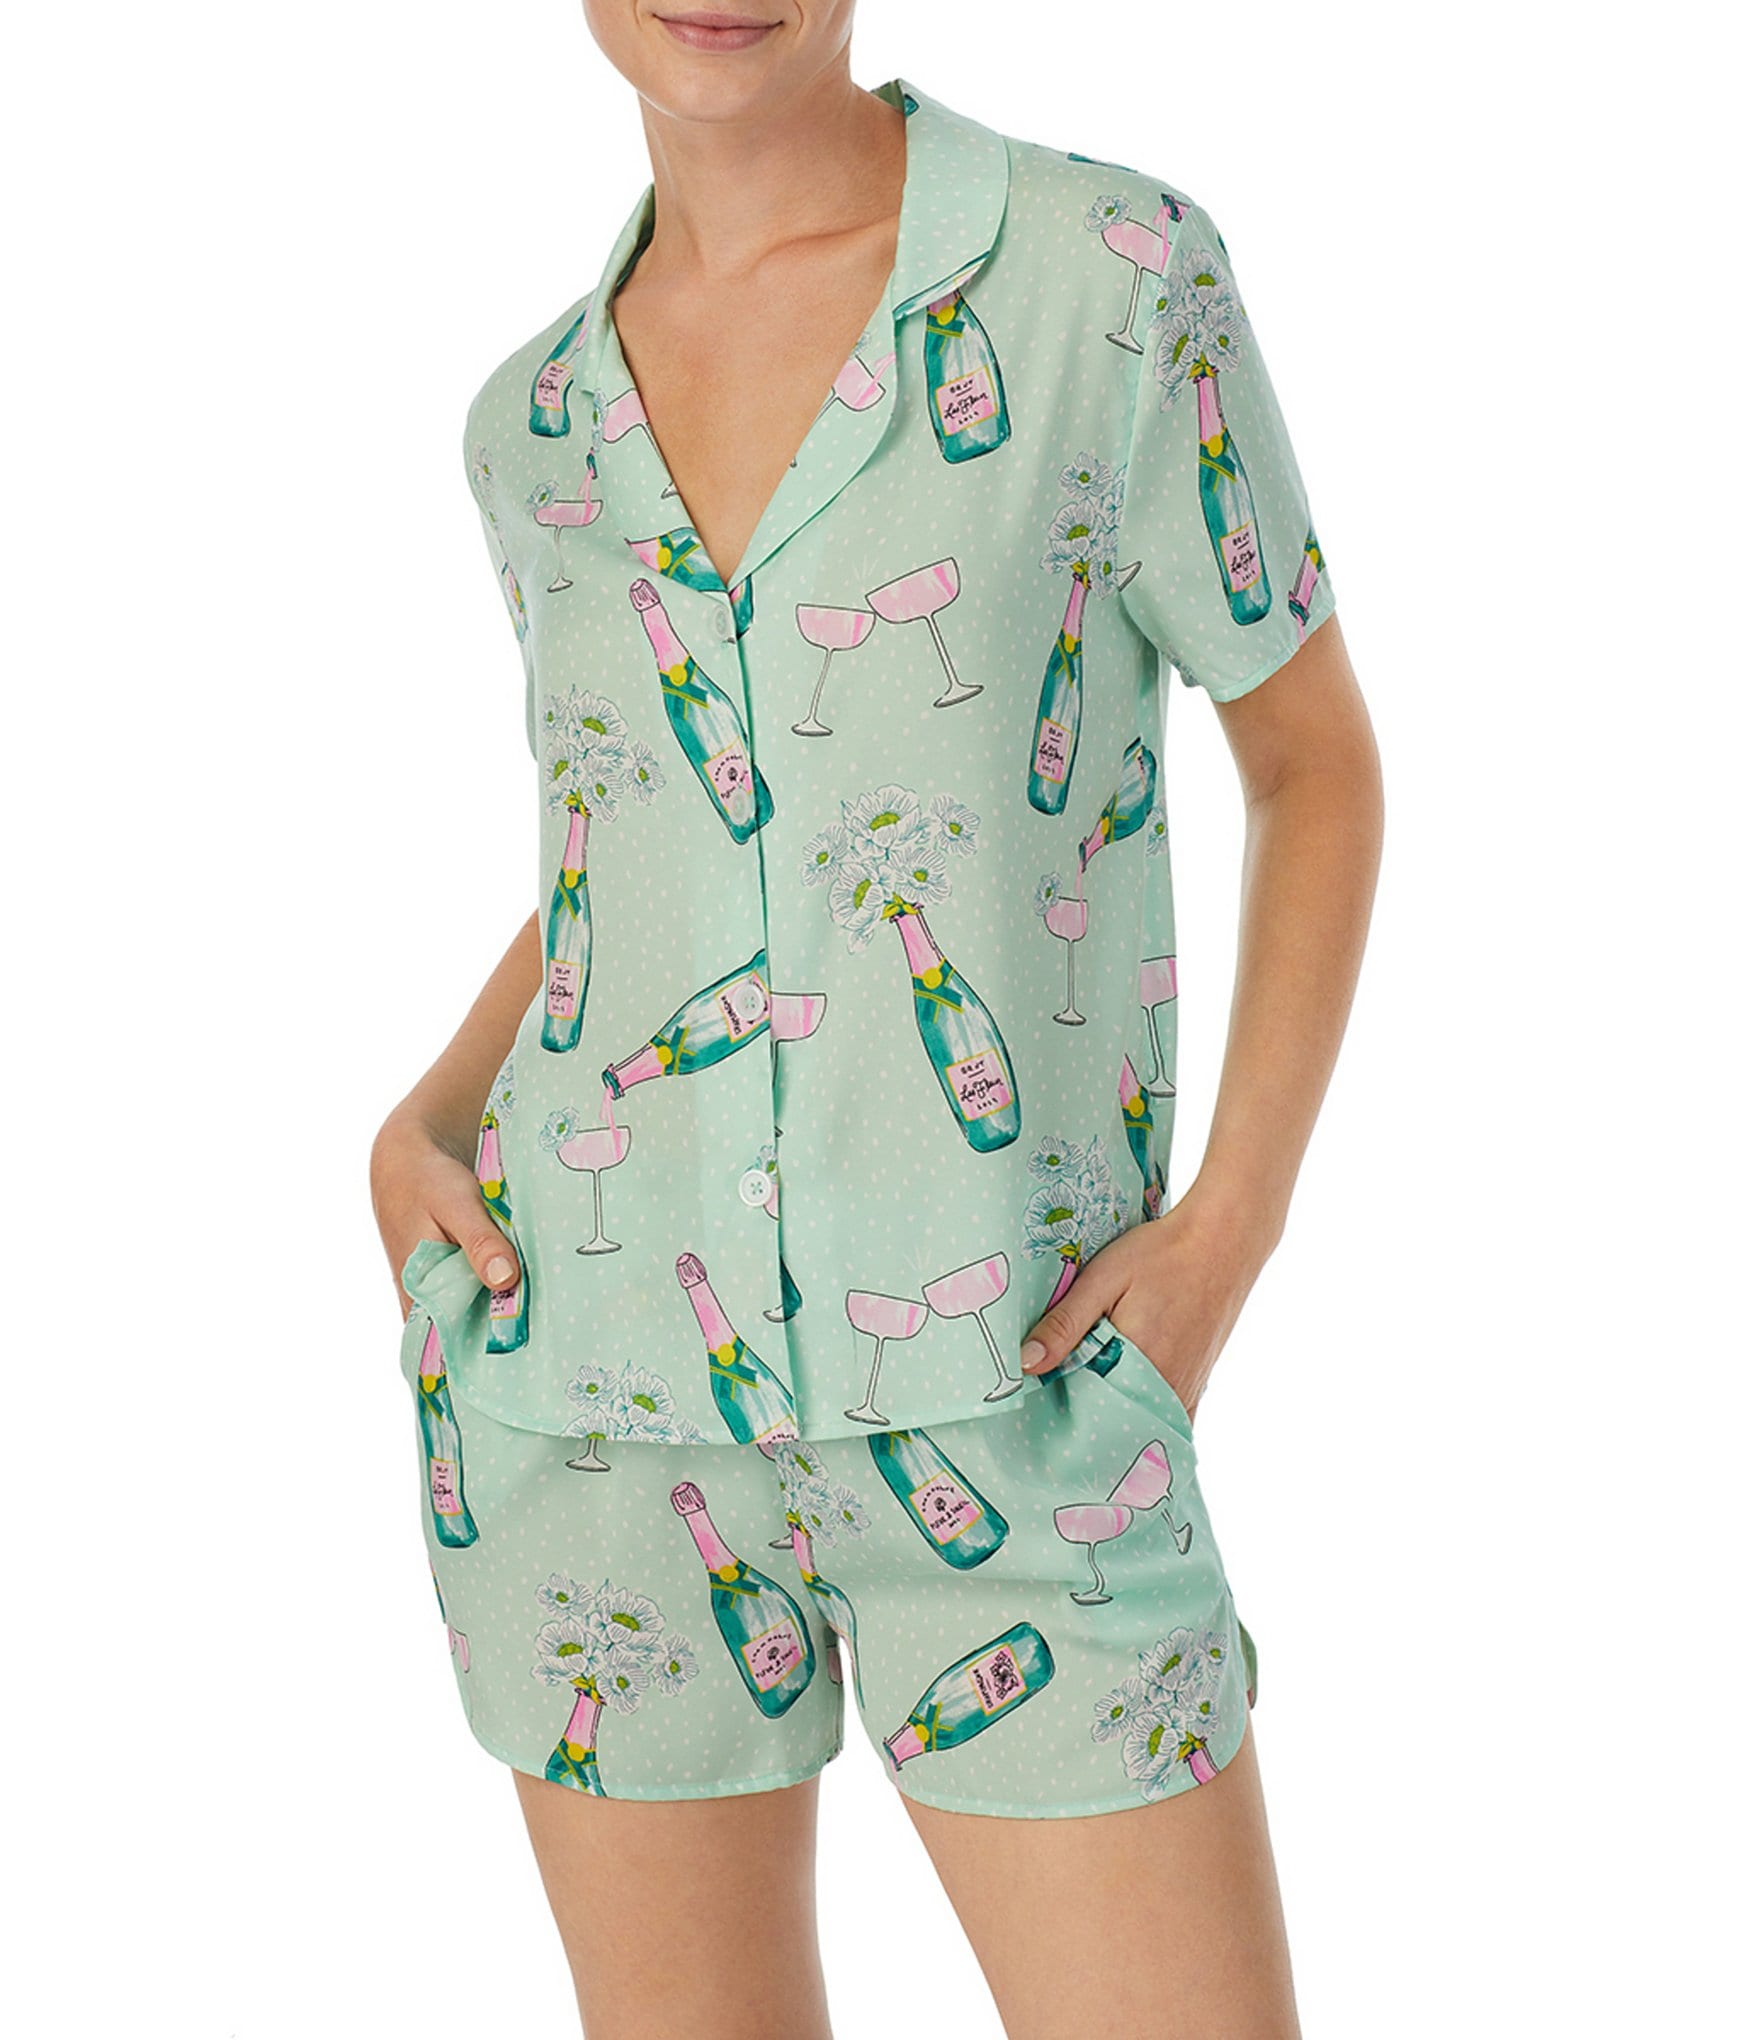 Free People Pillow Talk Floral Printed Button-Front Satin Pajama